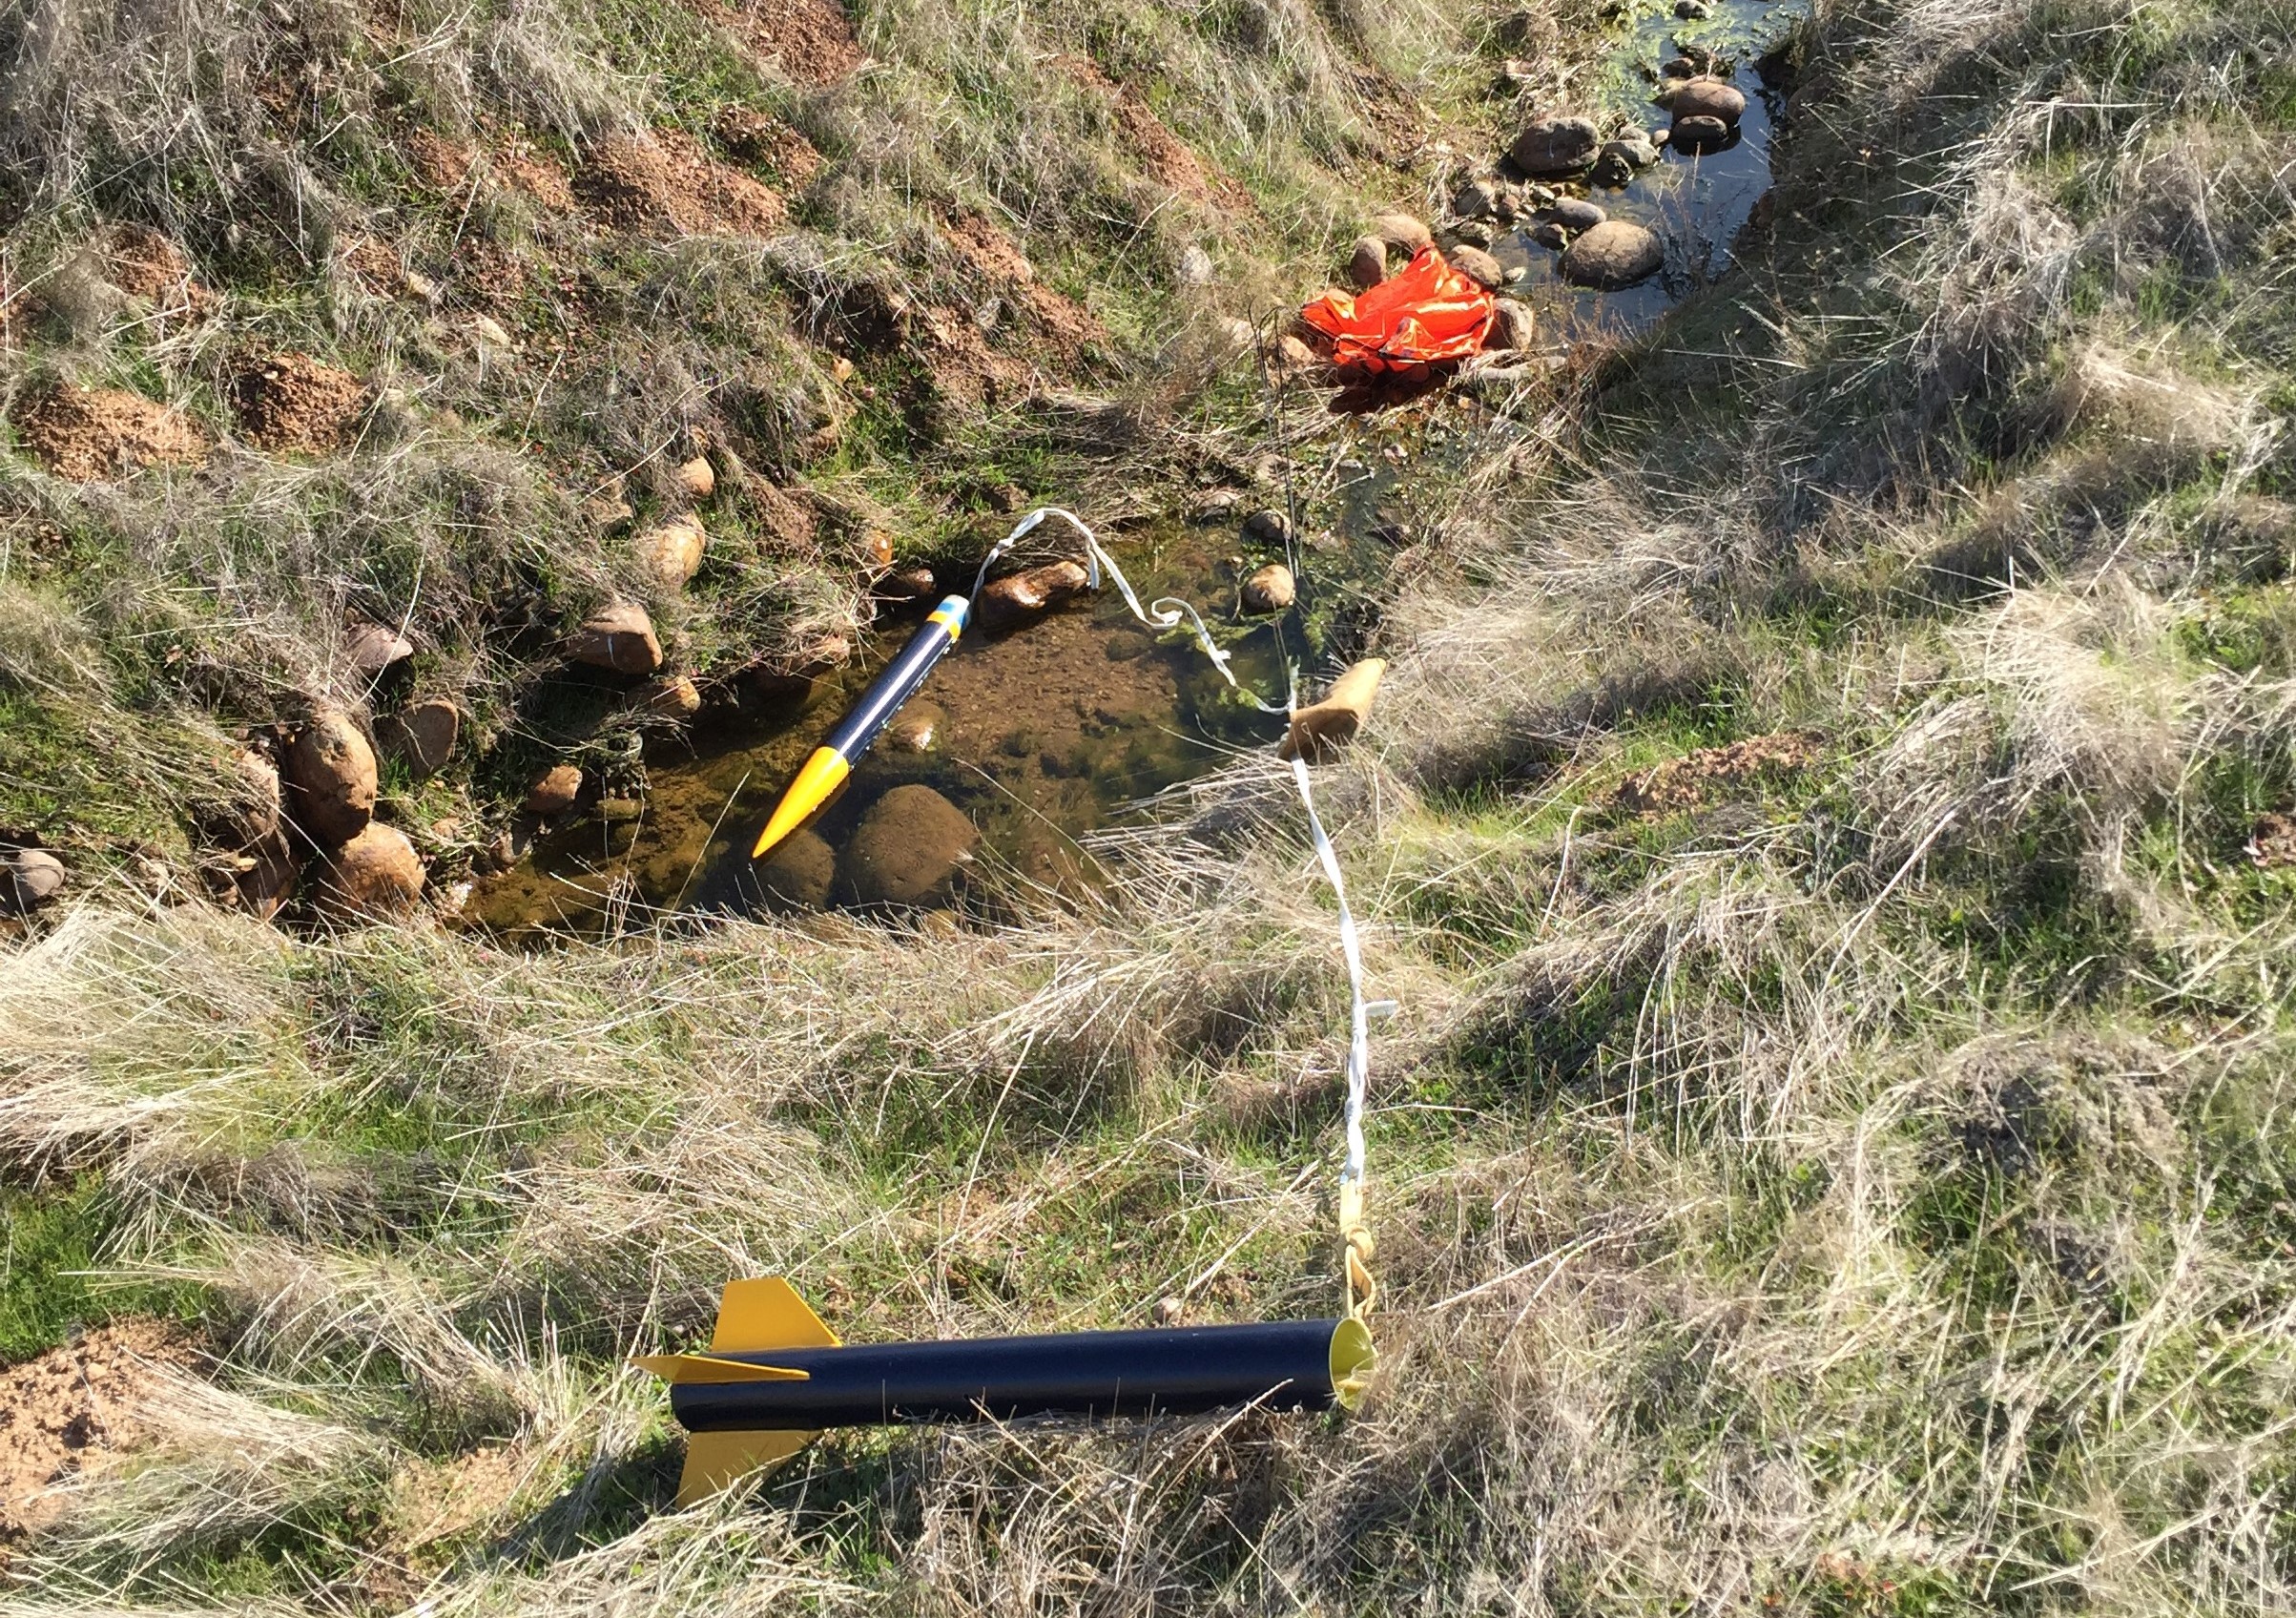 Successful recovery of my L1 cert rocket at Snow Ranch (near Stockton, CA).